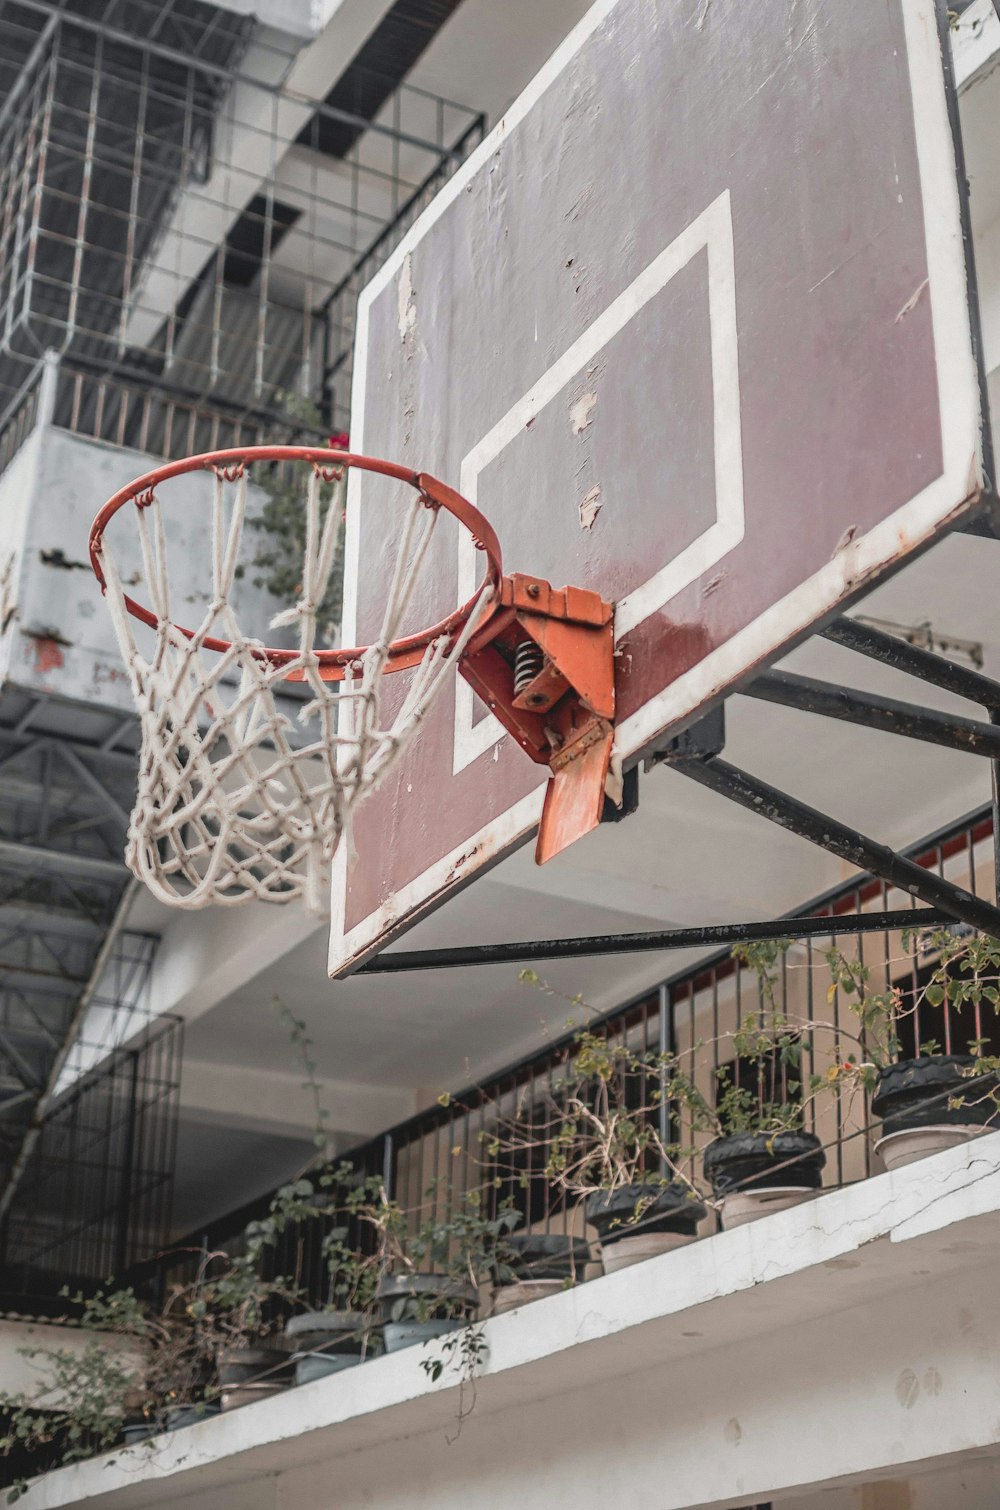 a basketball hoop with a basketball inside of it